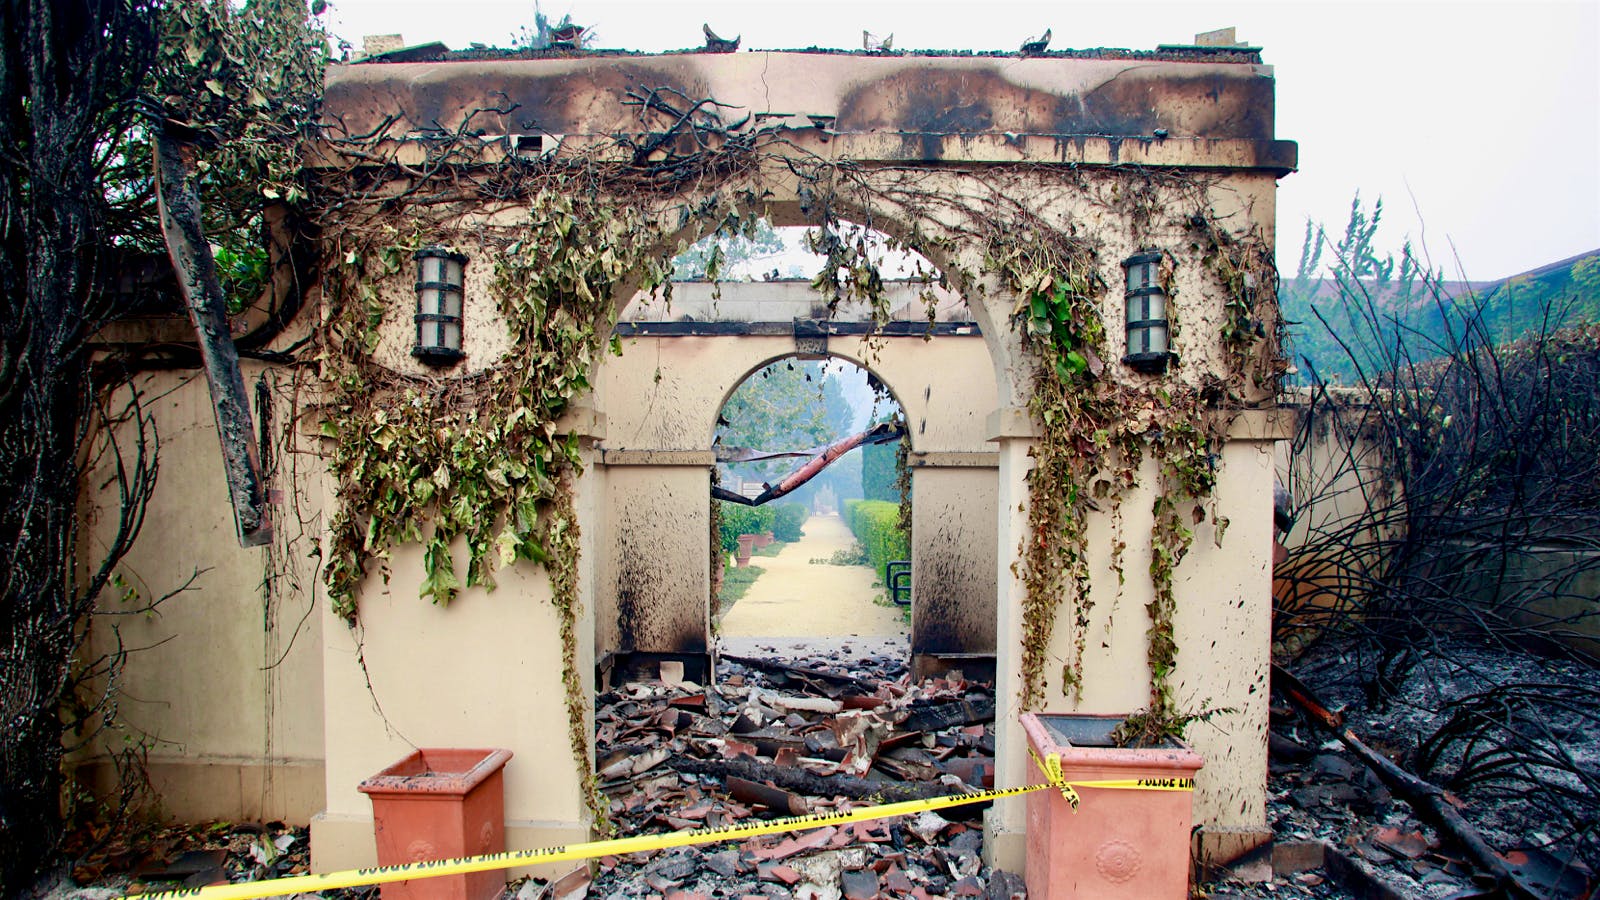 Oct. 20, 3:30 p.m. PST: California Fires—Damage Updates from Wineries 